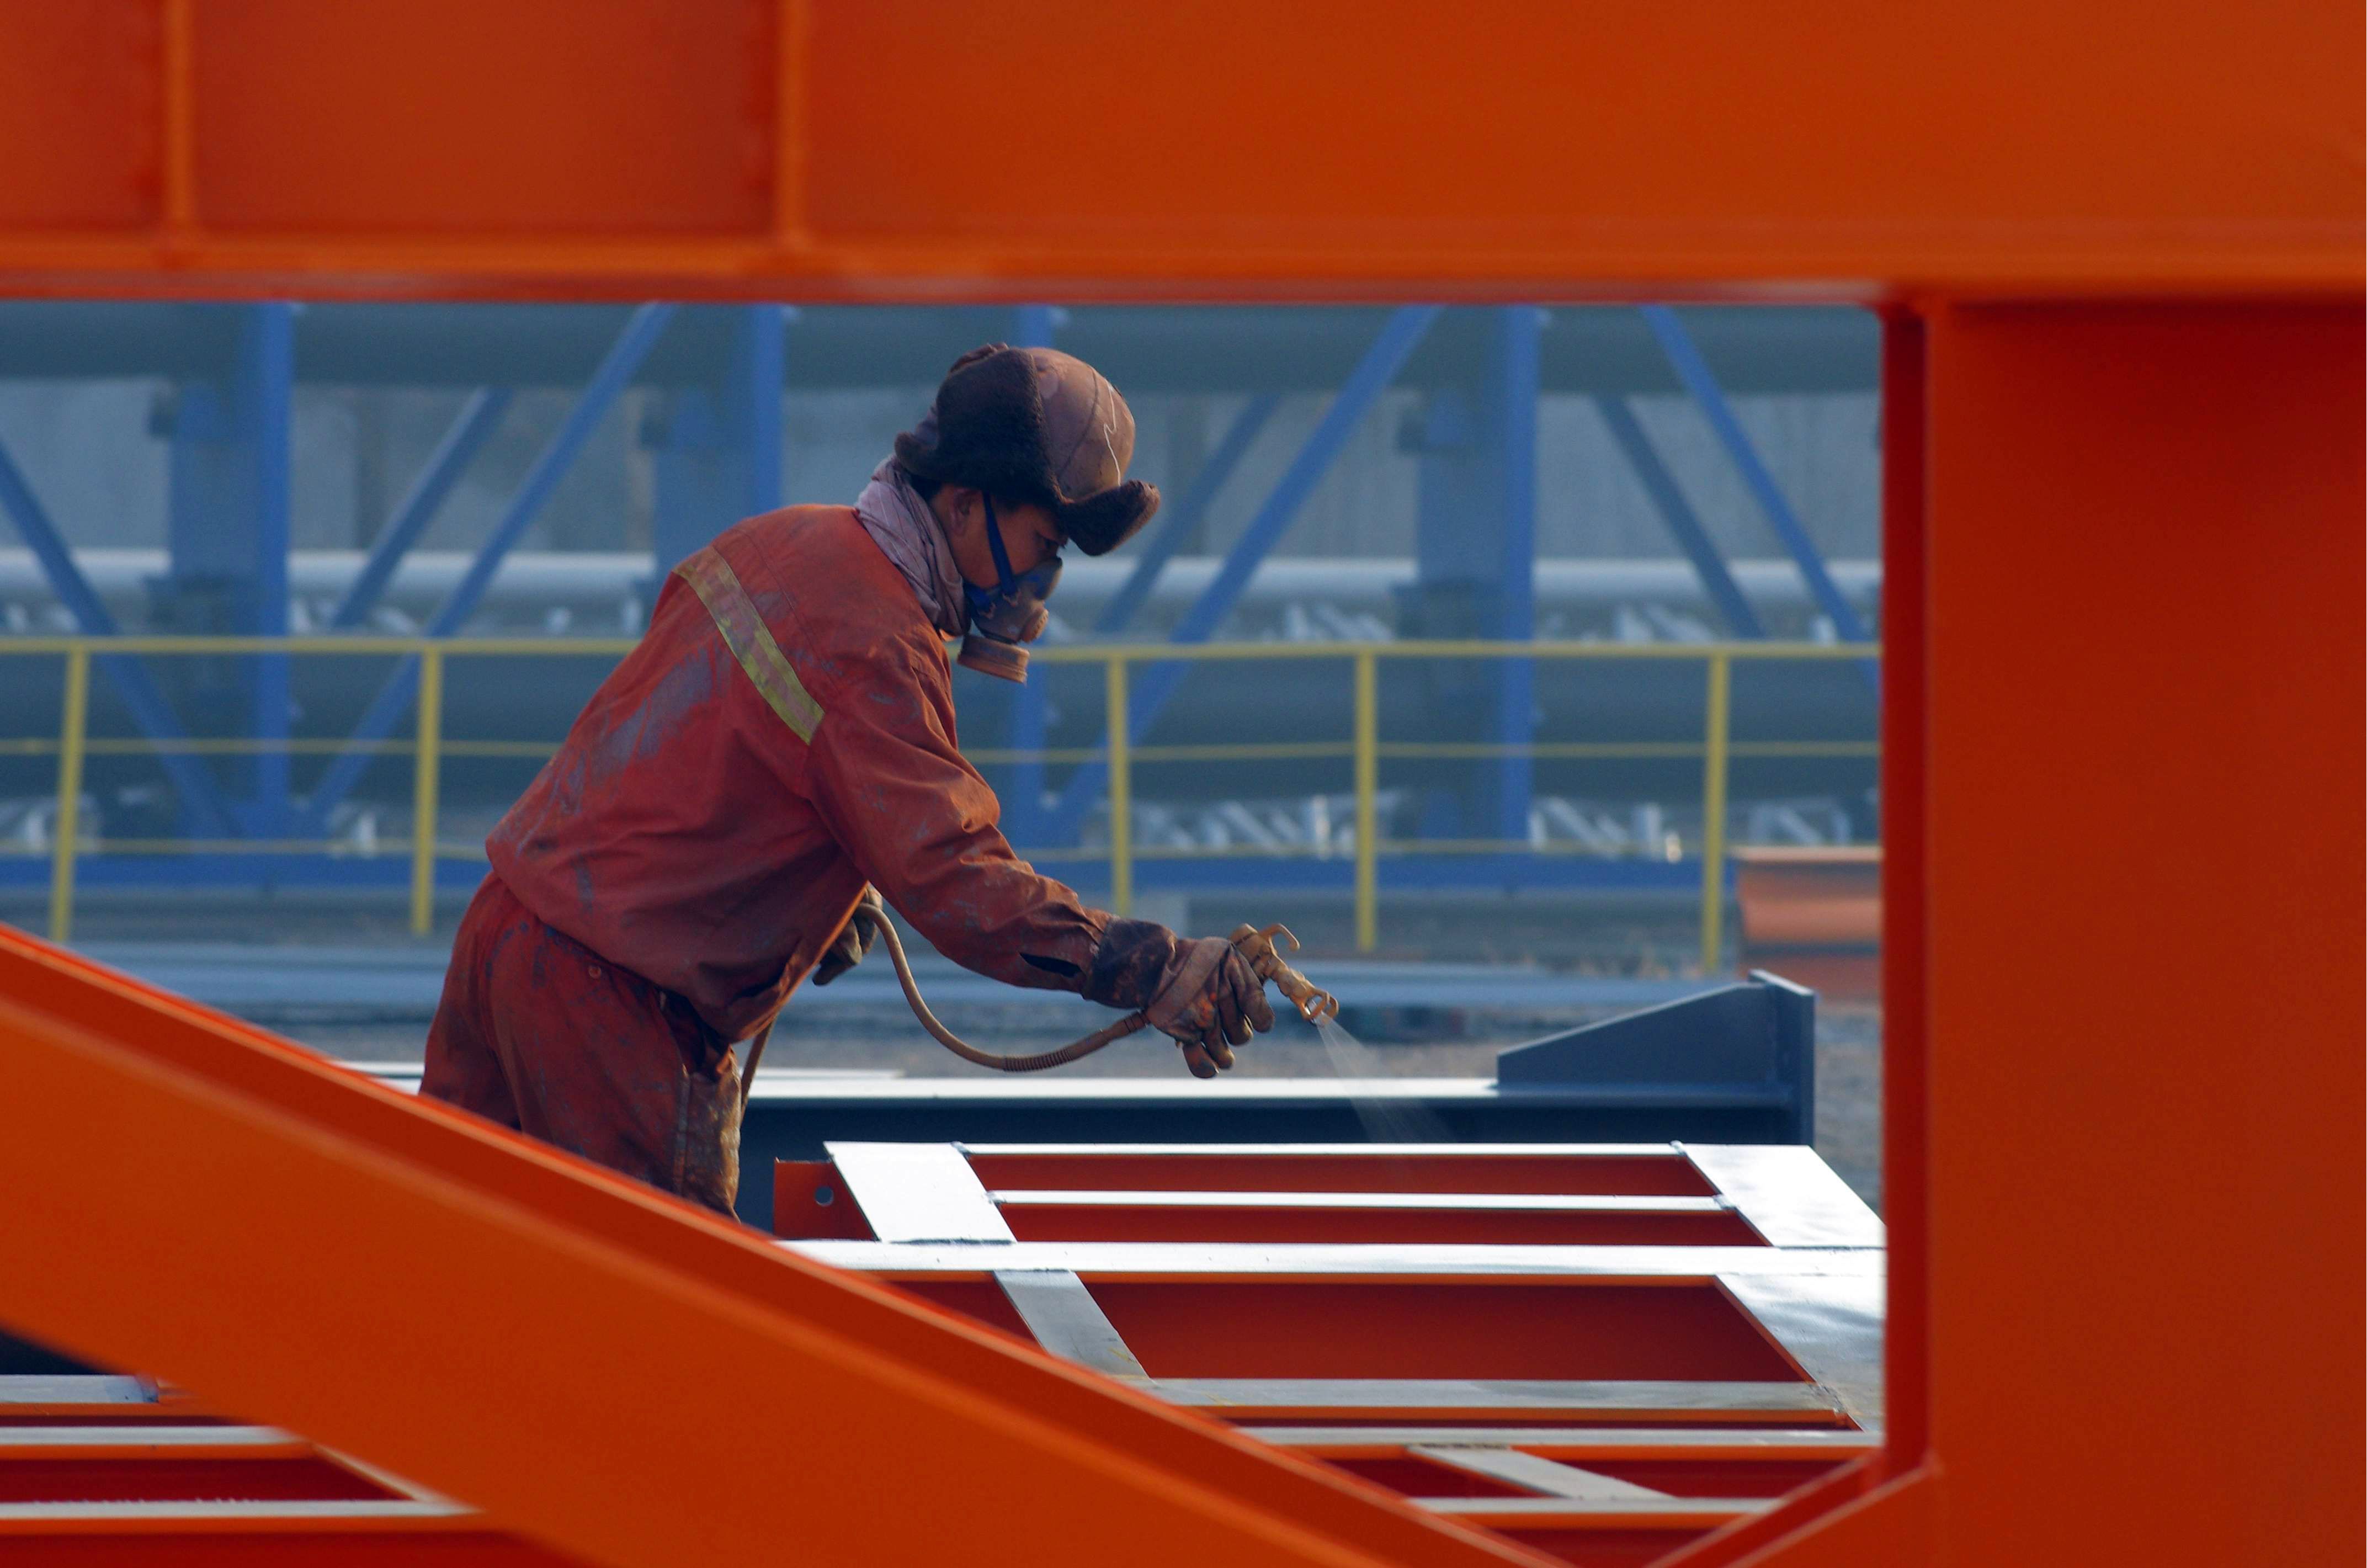 This picture taken on January 2, 2016 shows a Chinese worker spraying lacquer on steel in a factory in Rizhao, east China's Shandong province. China's factory activity shrank further in December, a private survey showed on January 4, the 10th consecutive month of contraction with the world's second-largest economy set to post its weakest growth in a quarter of a century. CHINA OUT AFP PHOTO